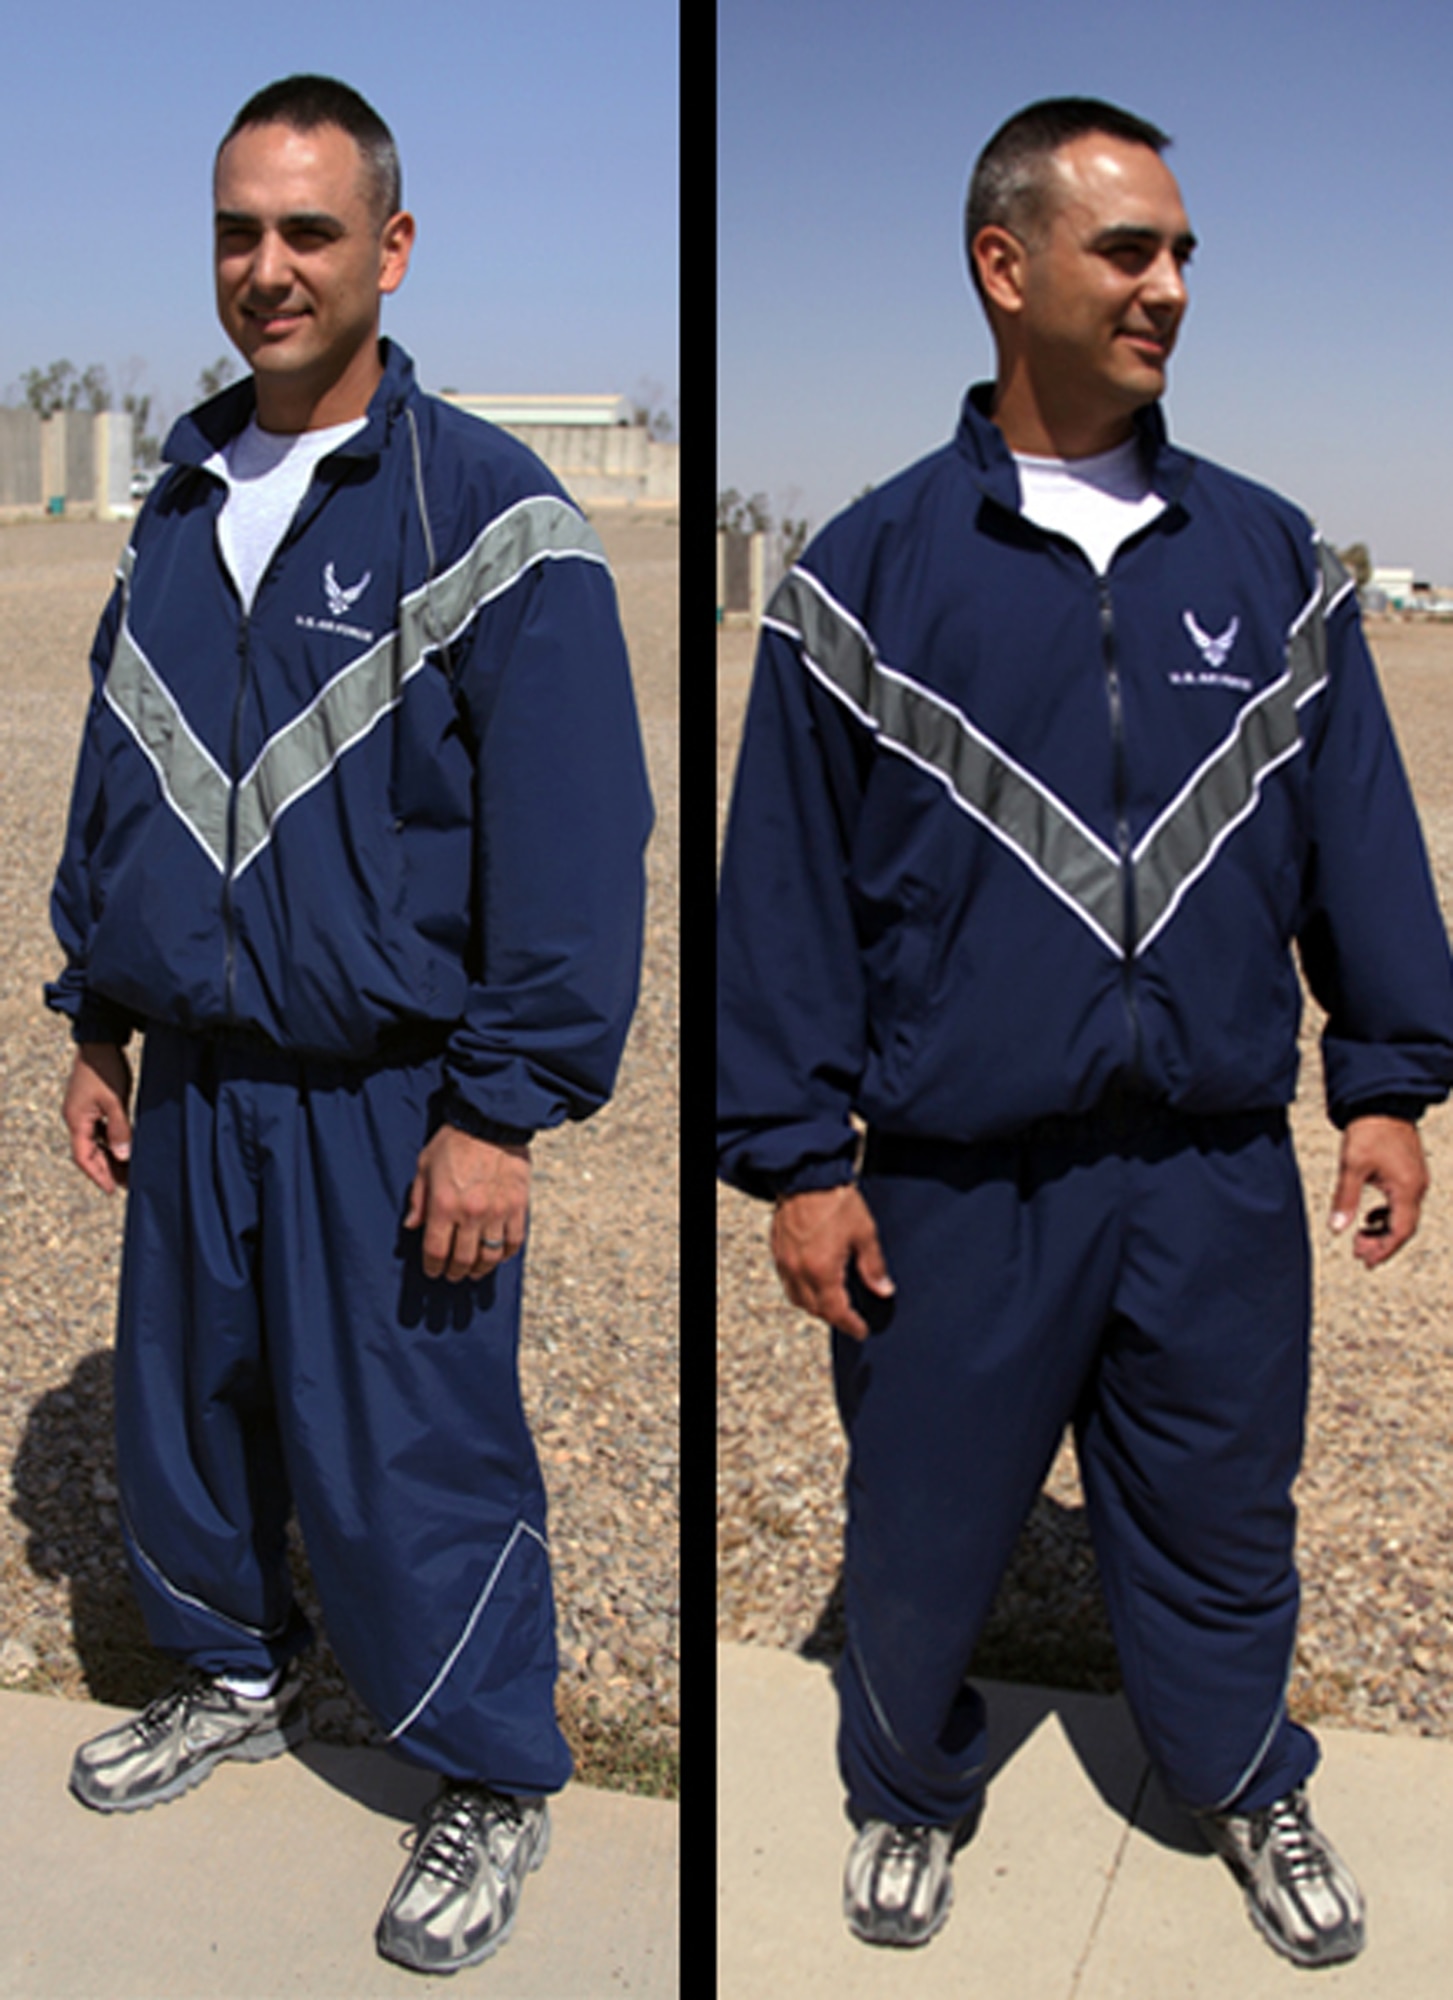 Physical fitness uniform has wear guidelines too > 446th Airlift